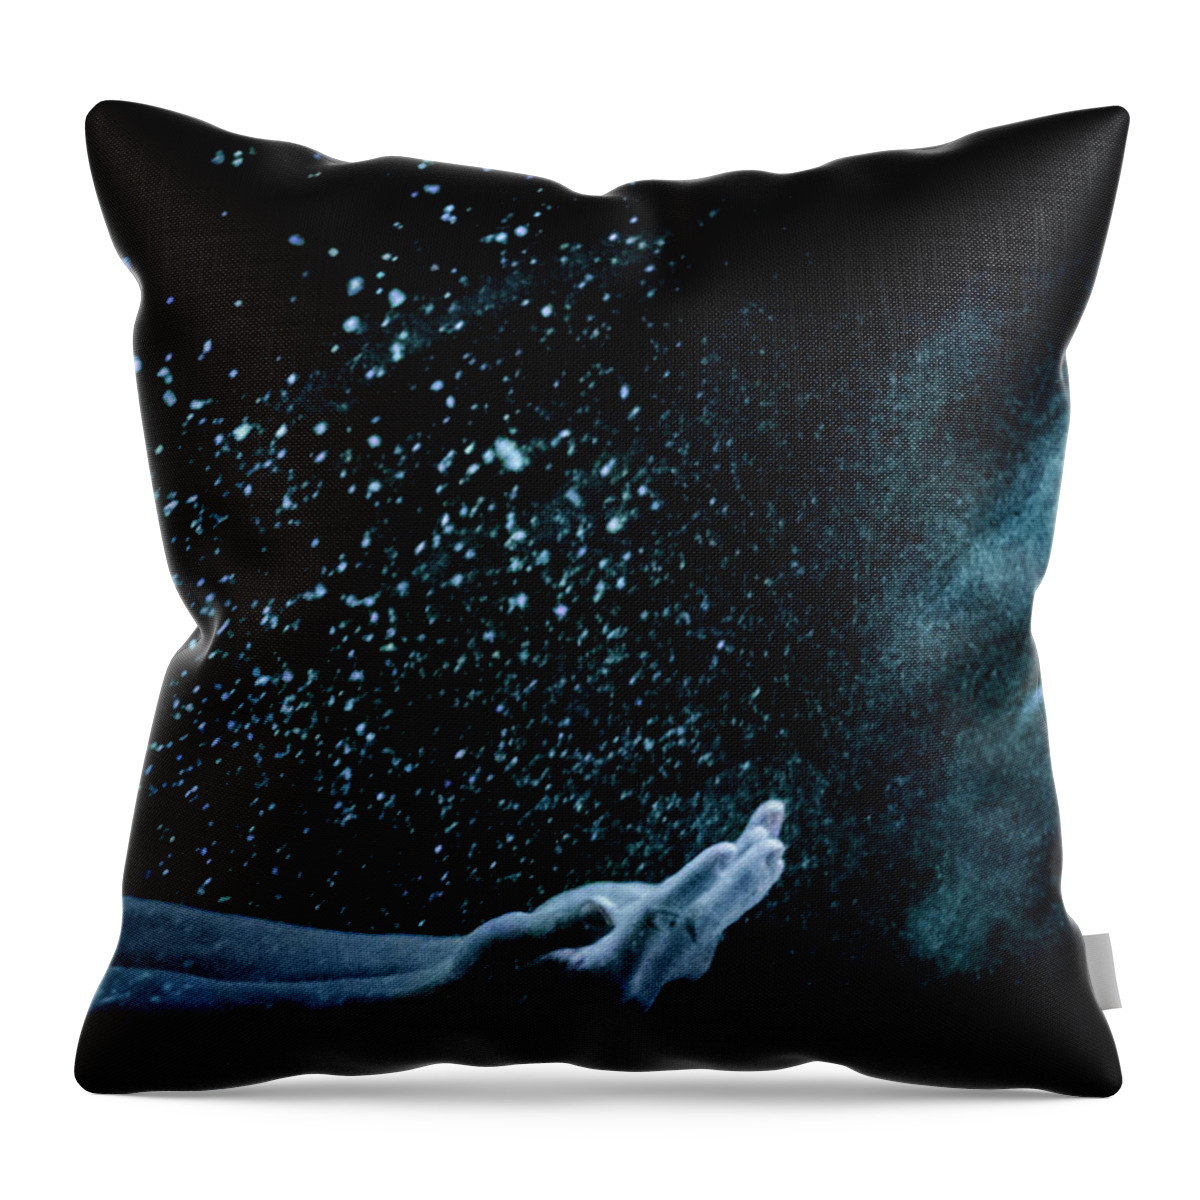 Creation Throw Pillow featuring the photograph Creation 4 by Rick Saint